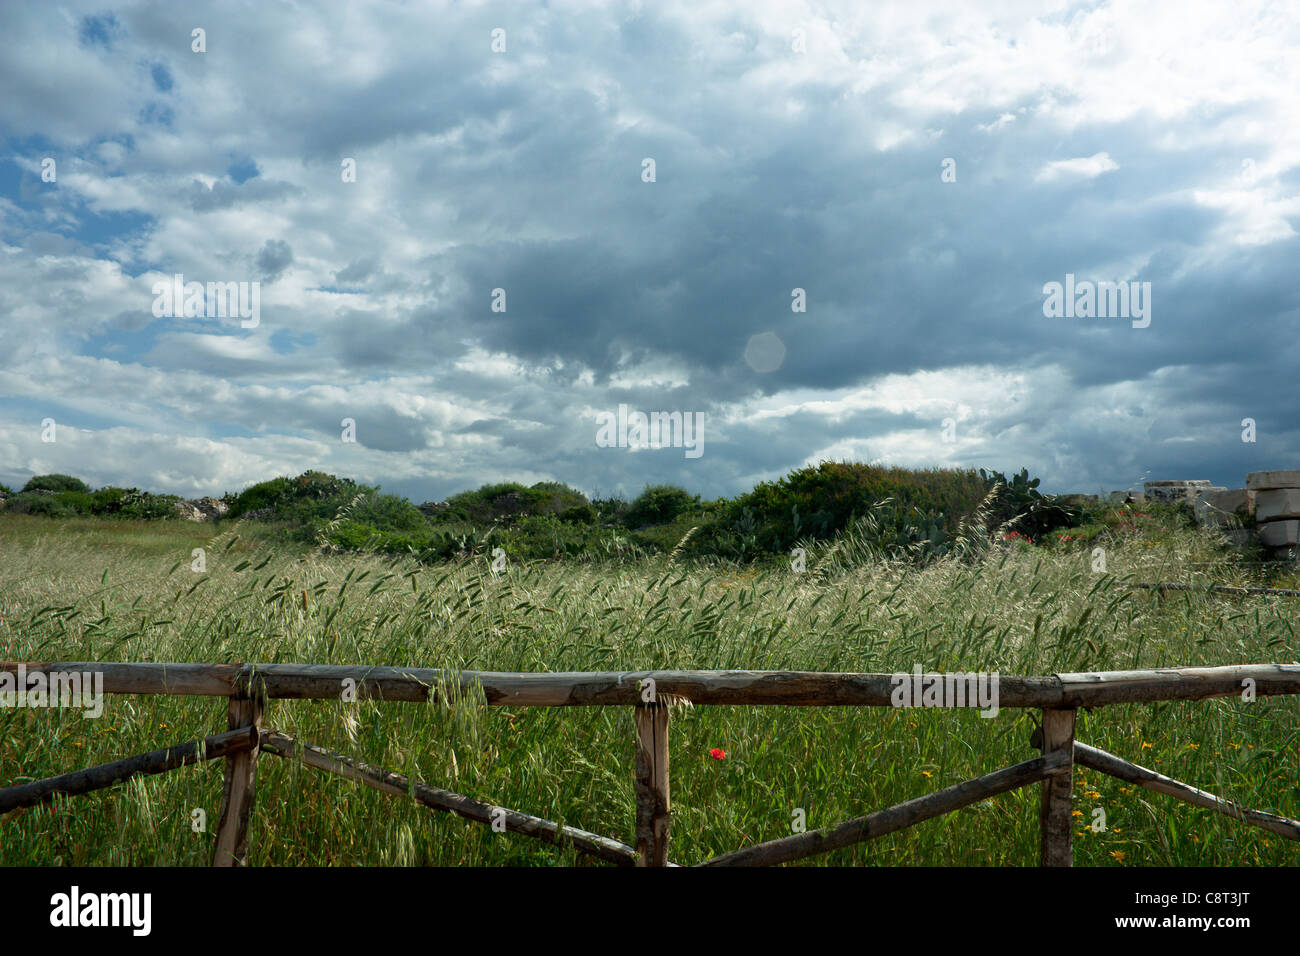 Wooden Fence with Grass Field Stock Photo